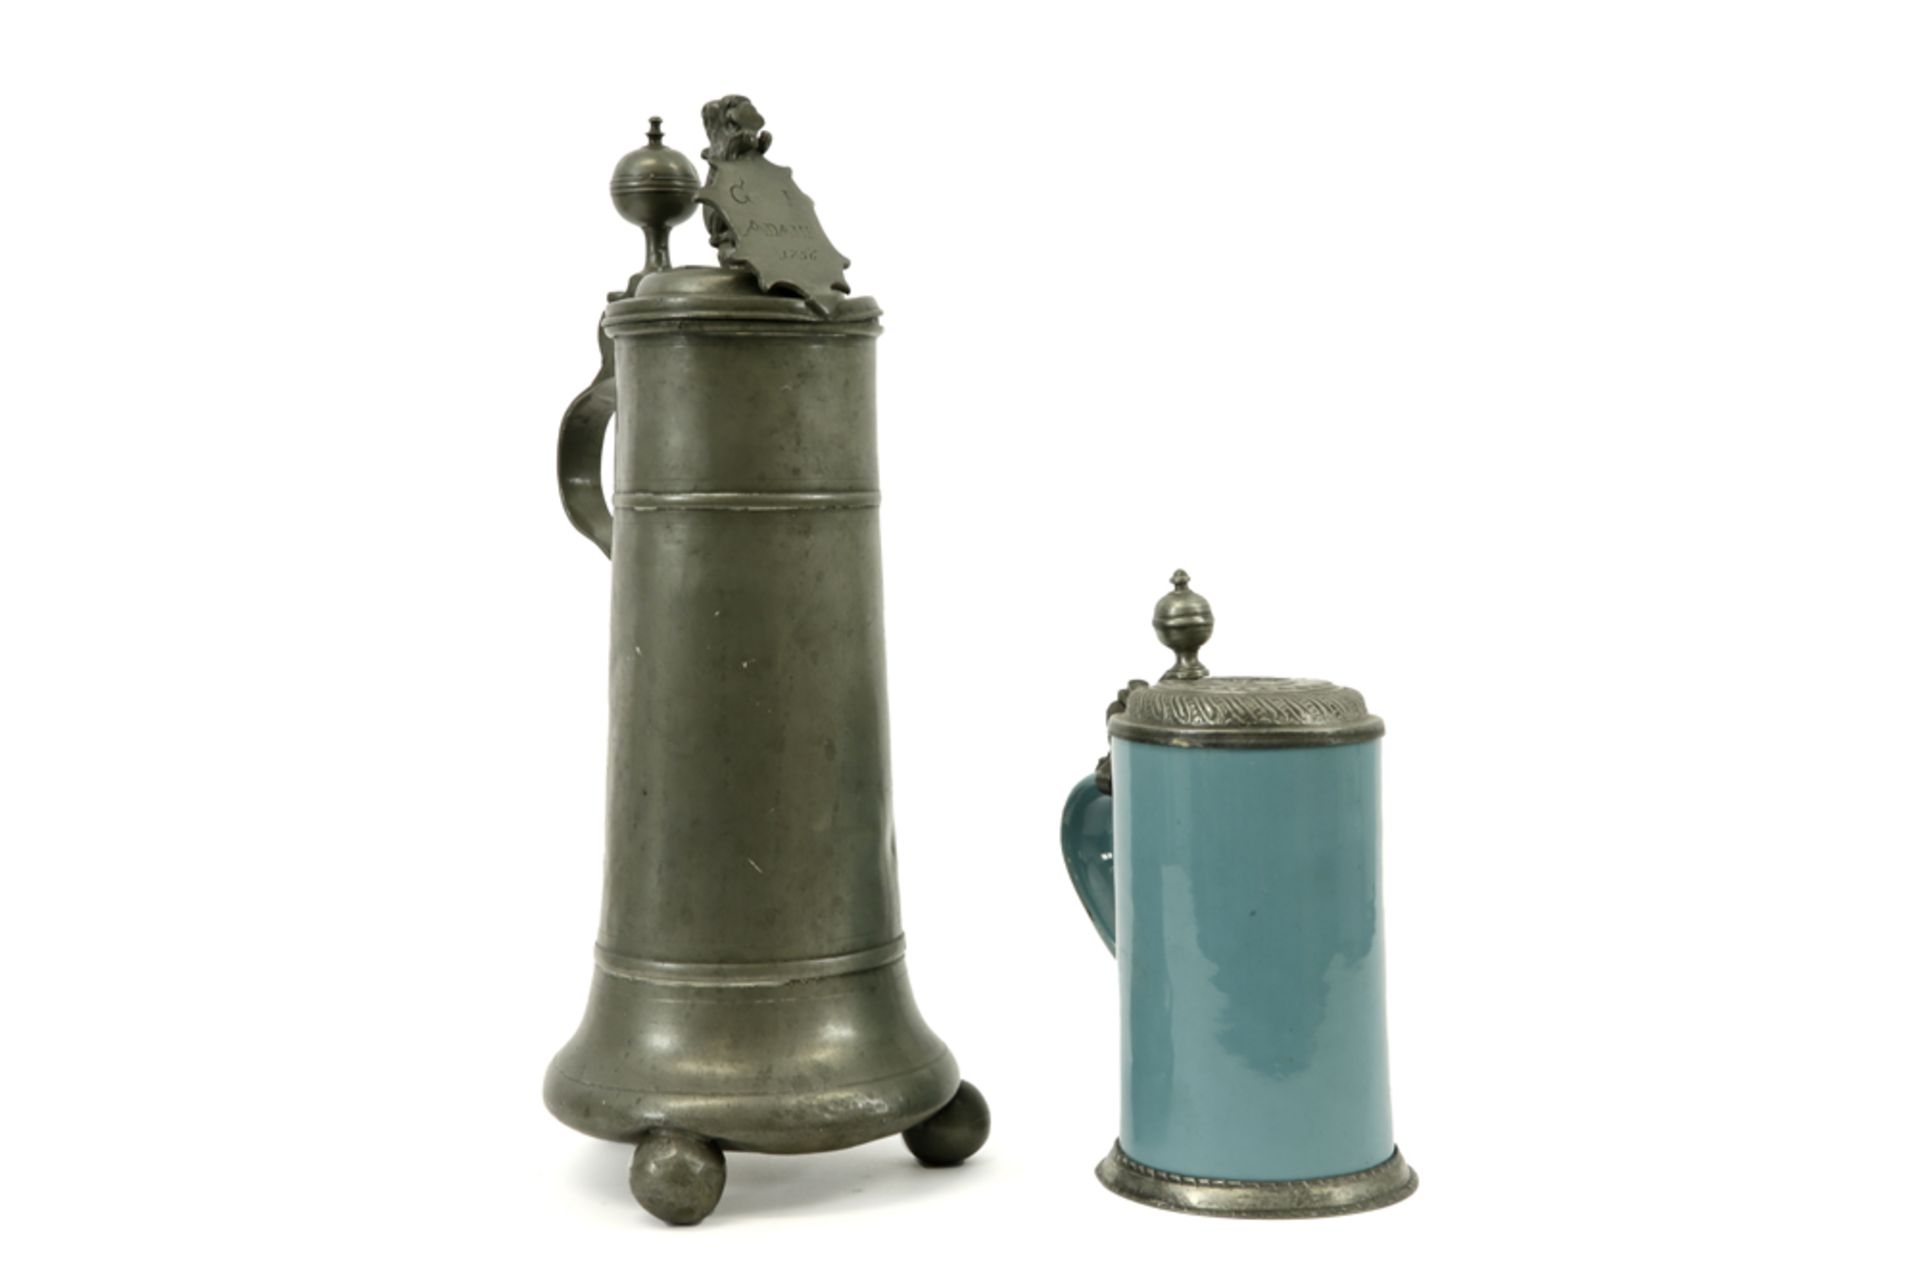 18th Cent. guild tankard in pewter and a beer jug in glazed ceramic and pewter || Lot (2) van een - Bild 2 aus 5